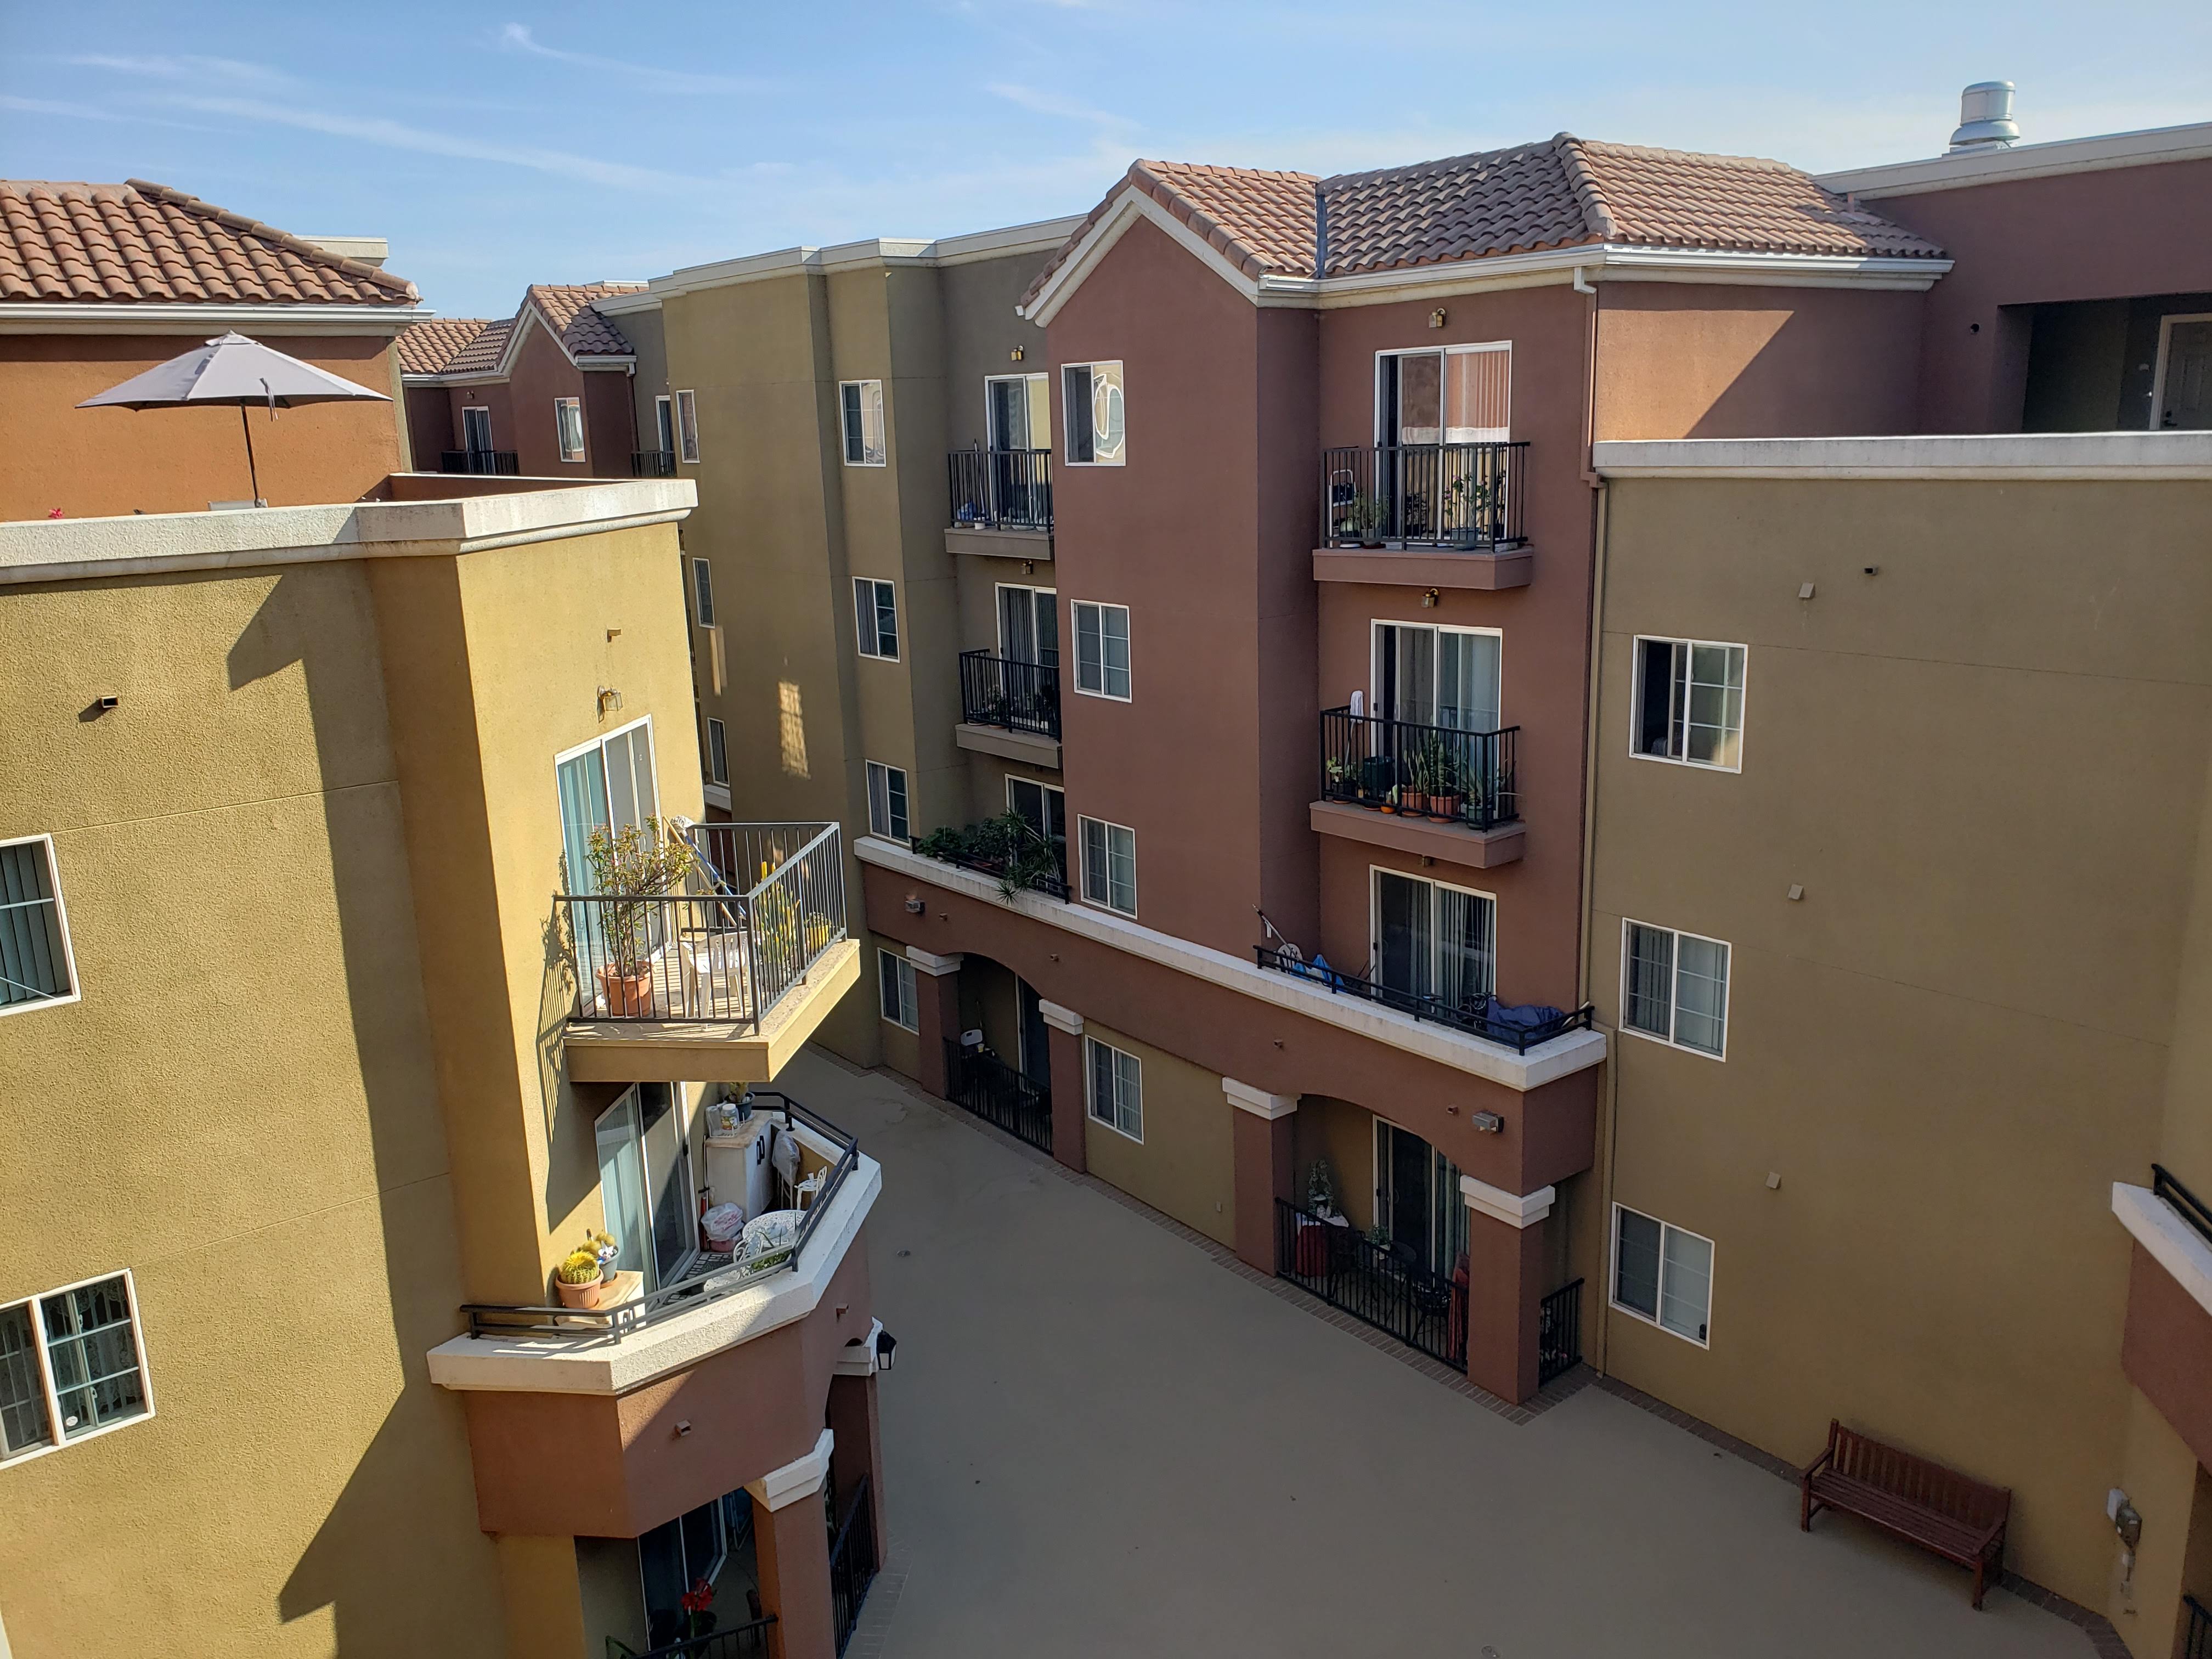 Image of vintage crossing senior apartments courtyard. Image taken from top floor. large courtyard with bench seating. Units with balcony access. some balconys with plants and misellaneous objects.